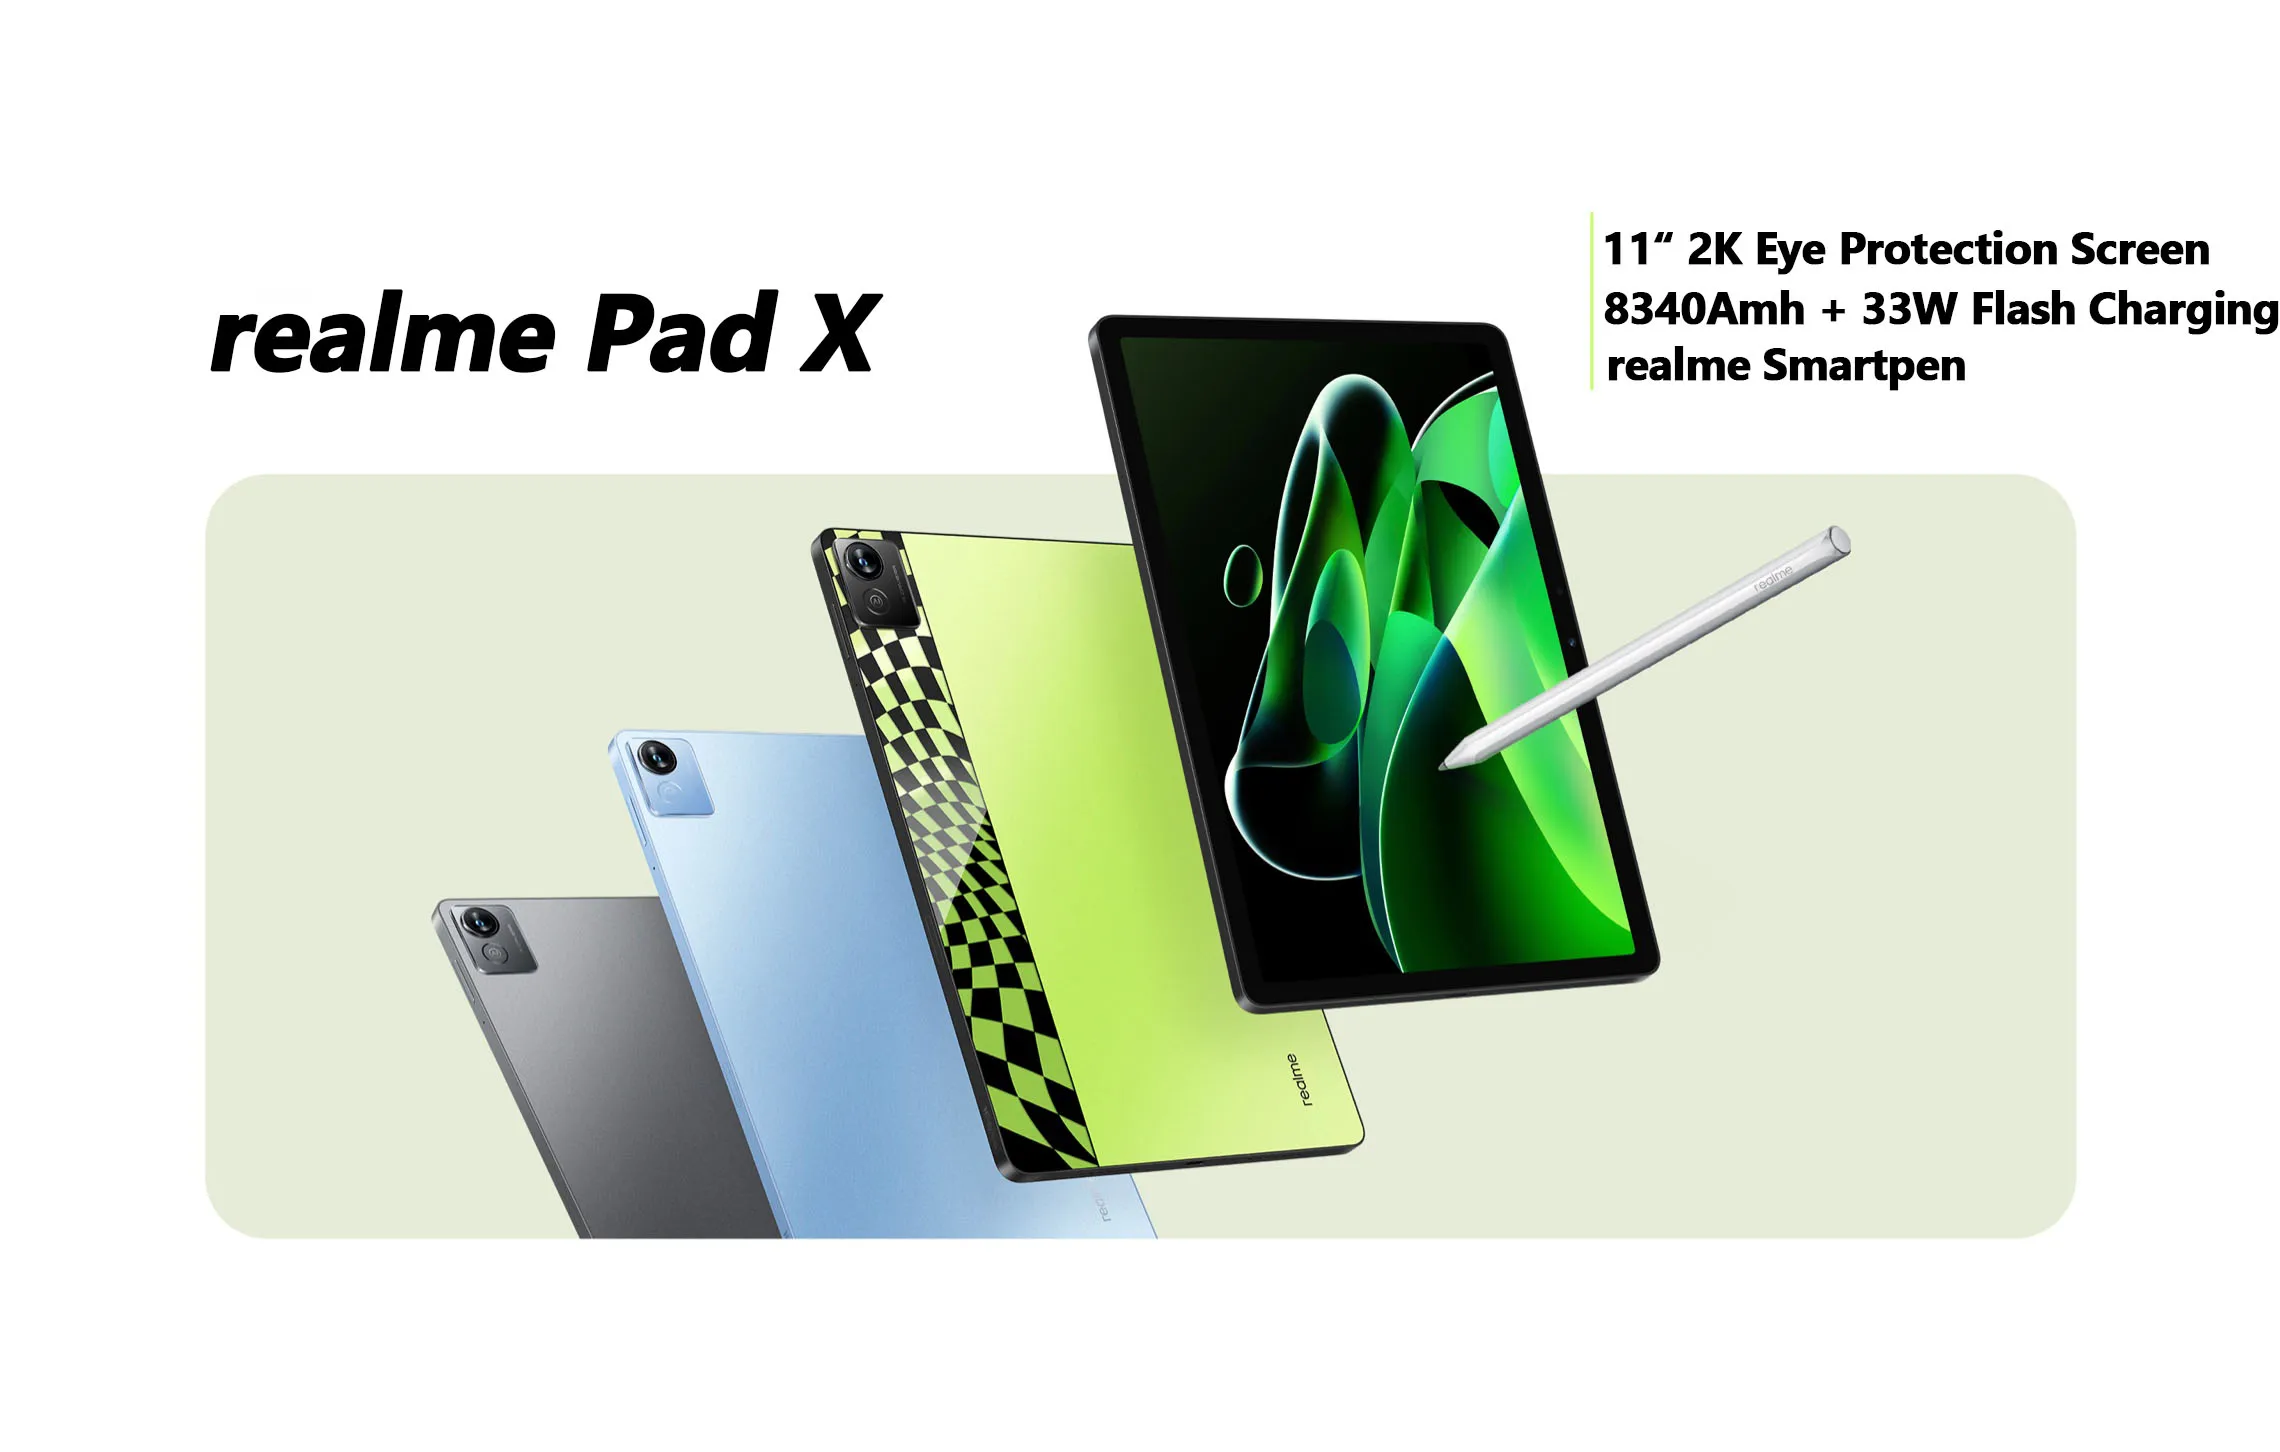 realme Pad X Tablet Snapdragon 695 11'' 2K Display 13MP Camera 8340mAh Battery 33W Charge Support Stylus Android tablet laptop